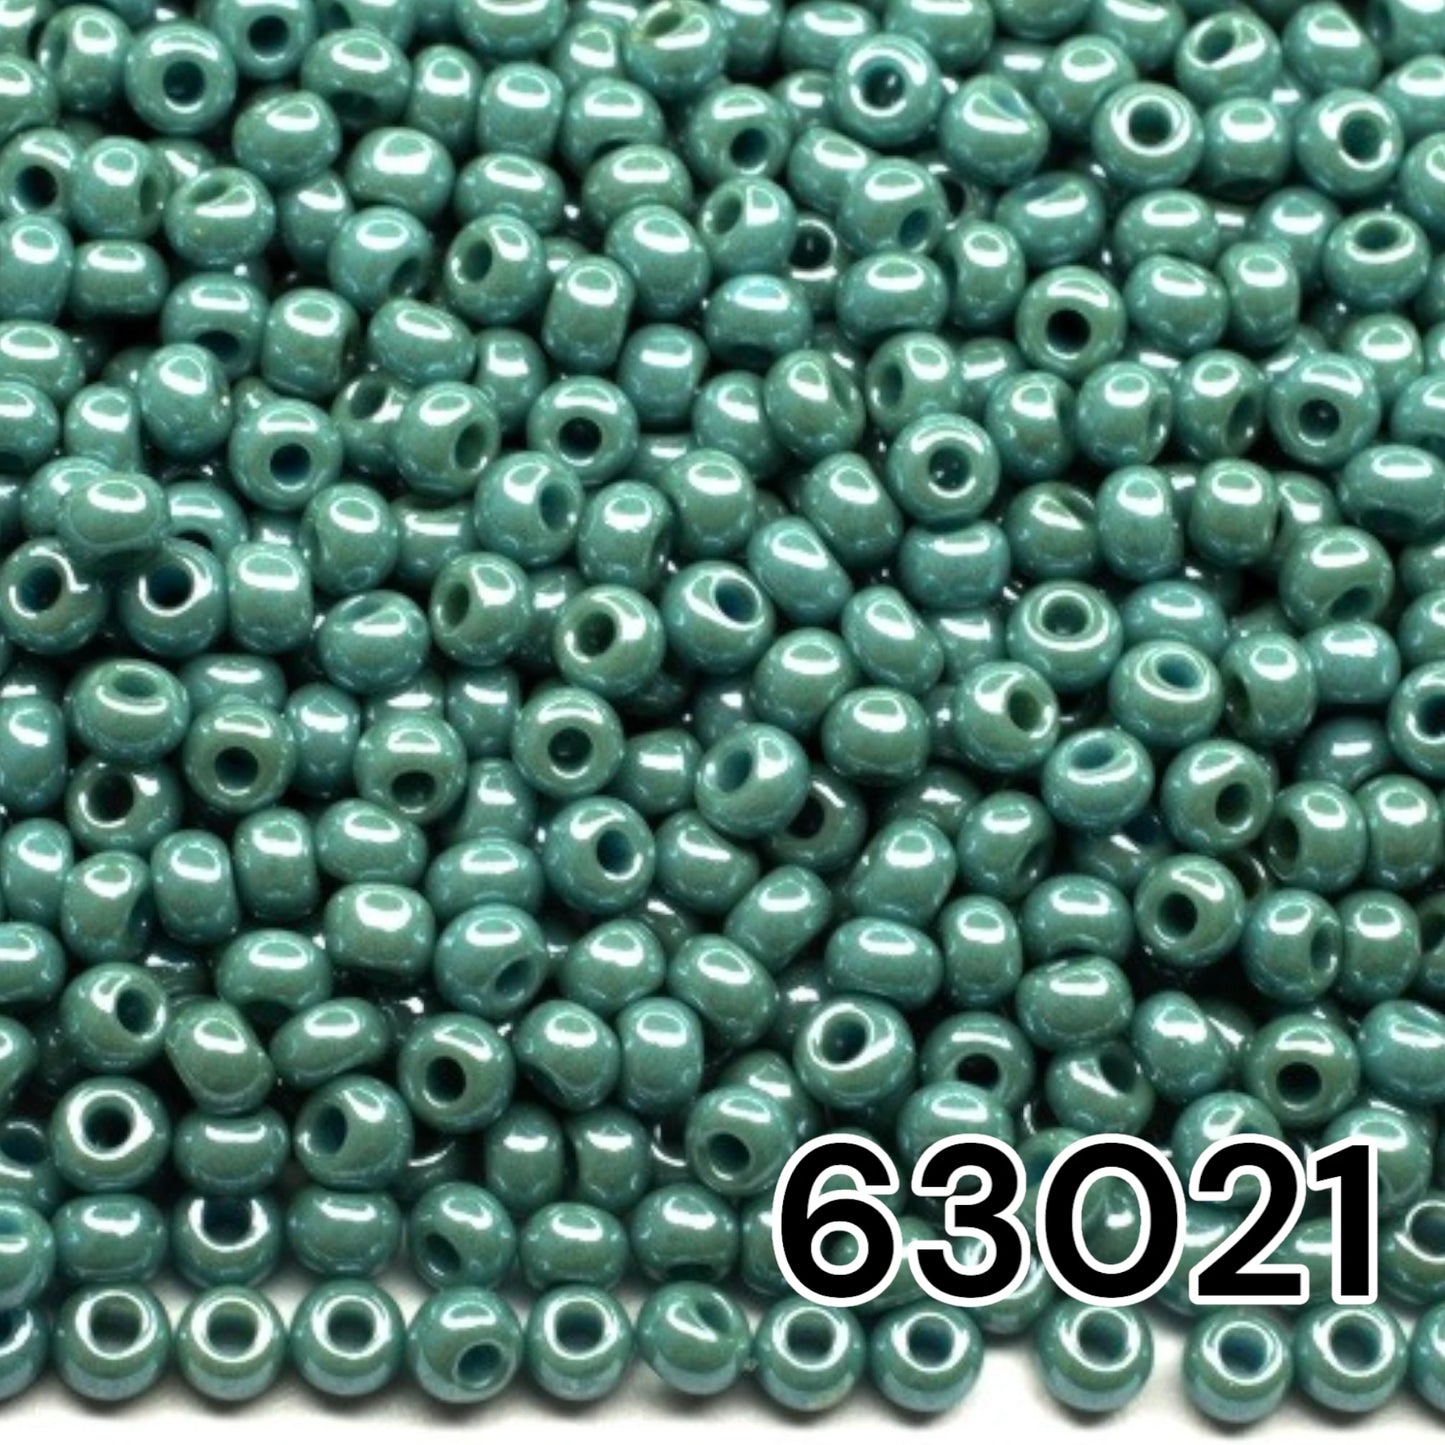 63021 Czech Seed Beads Preciosa Rocailles Opaque - Color Lustered